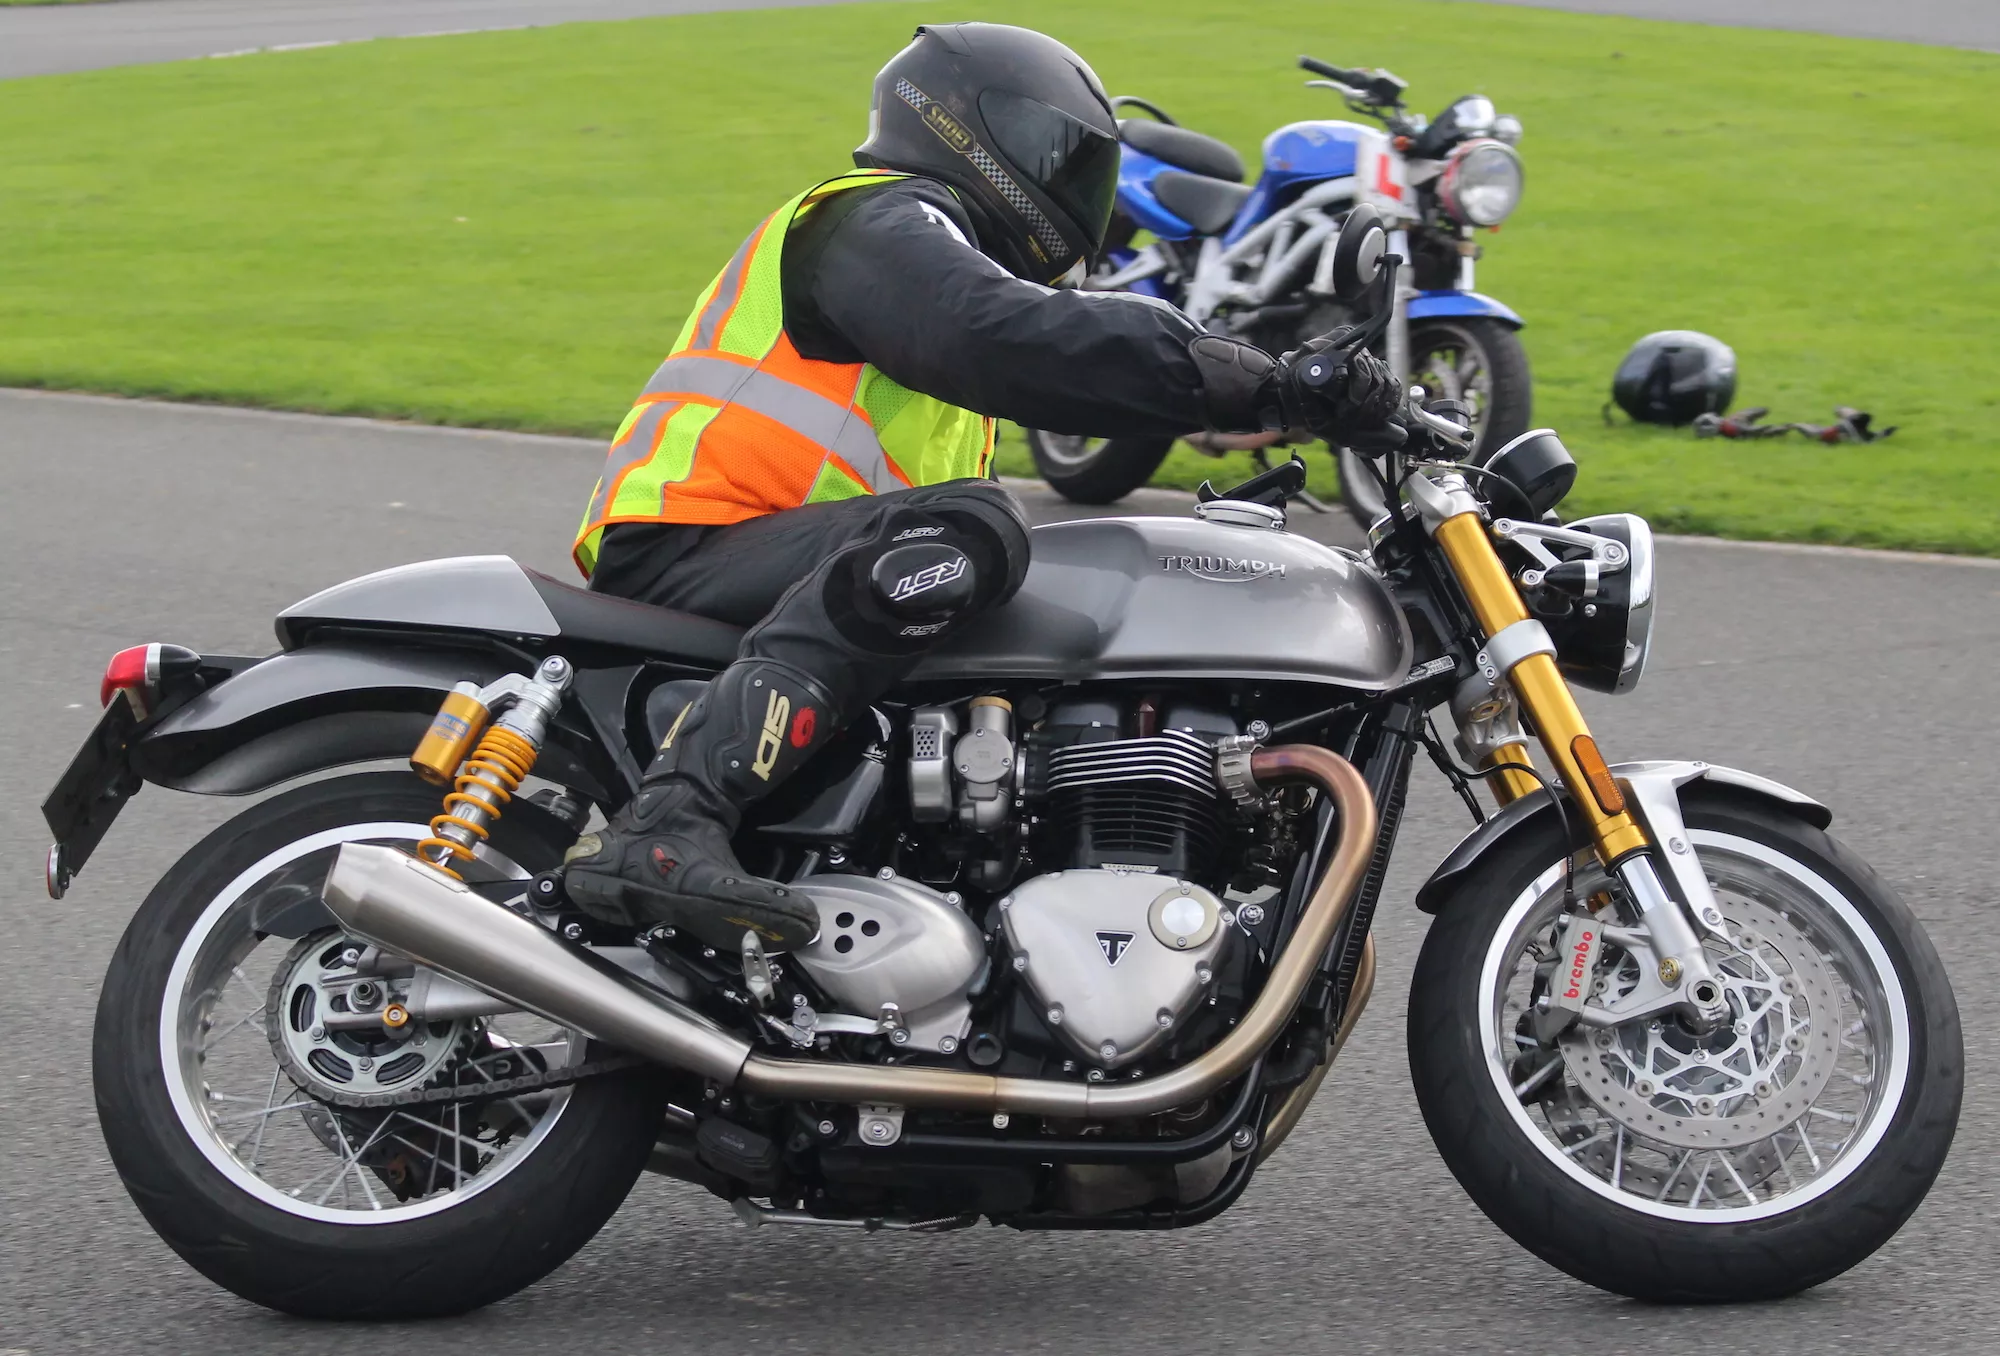 London Motorcycle Training - CBT test & DAS training in United Kingdom, Europe | Motorcycles - Rated 4.6